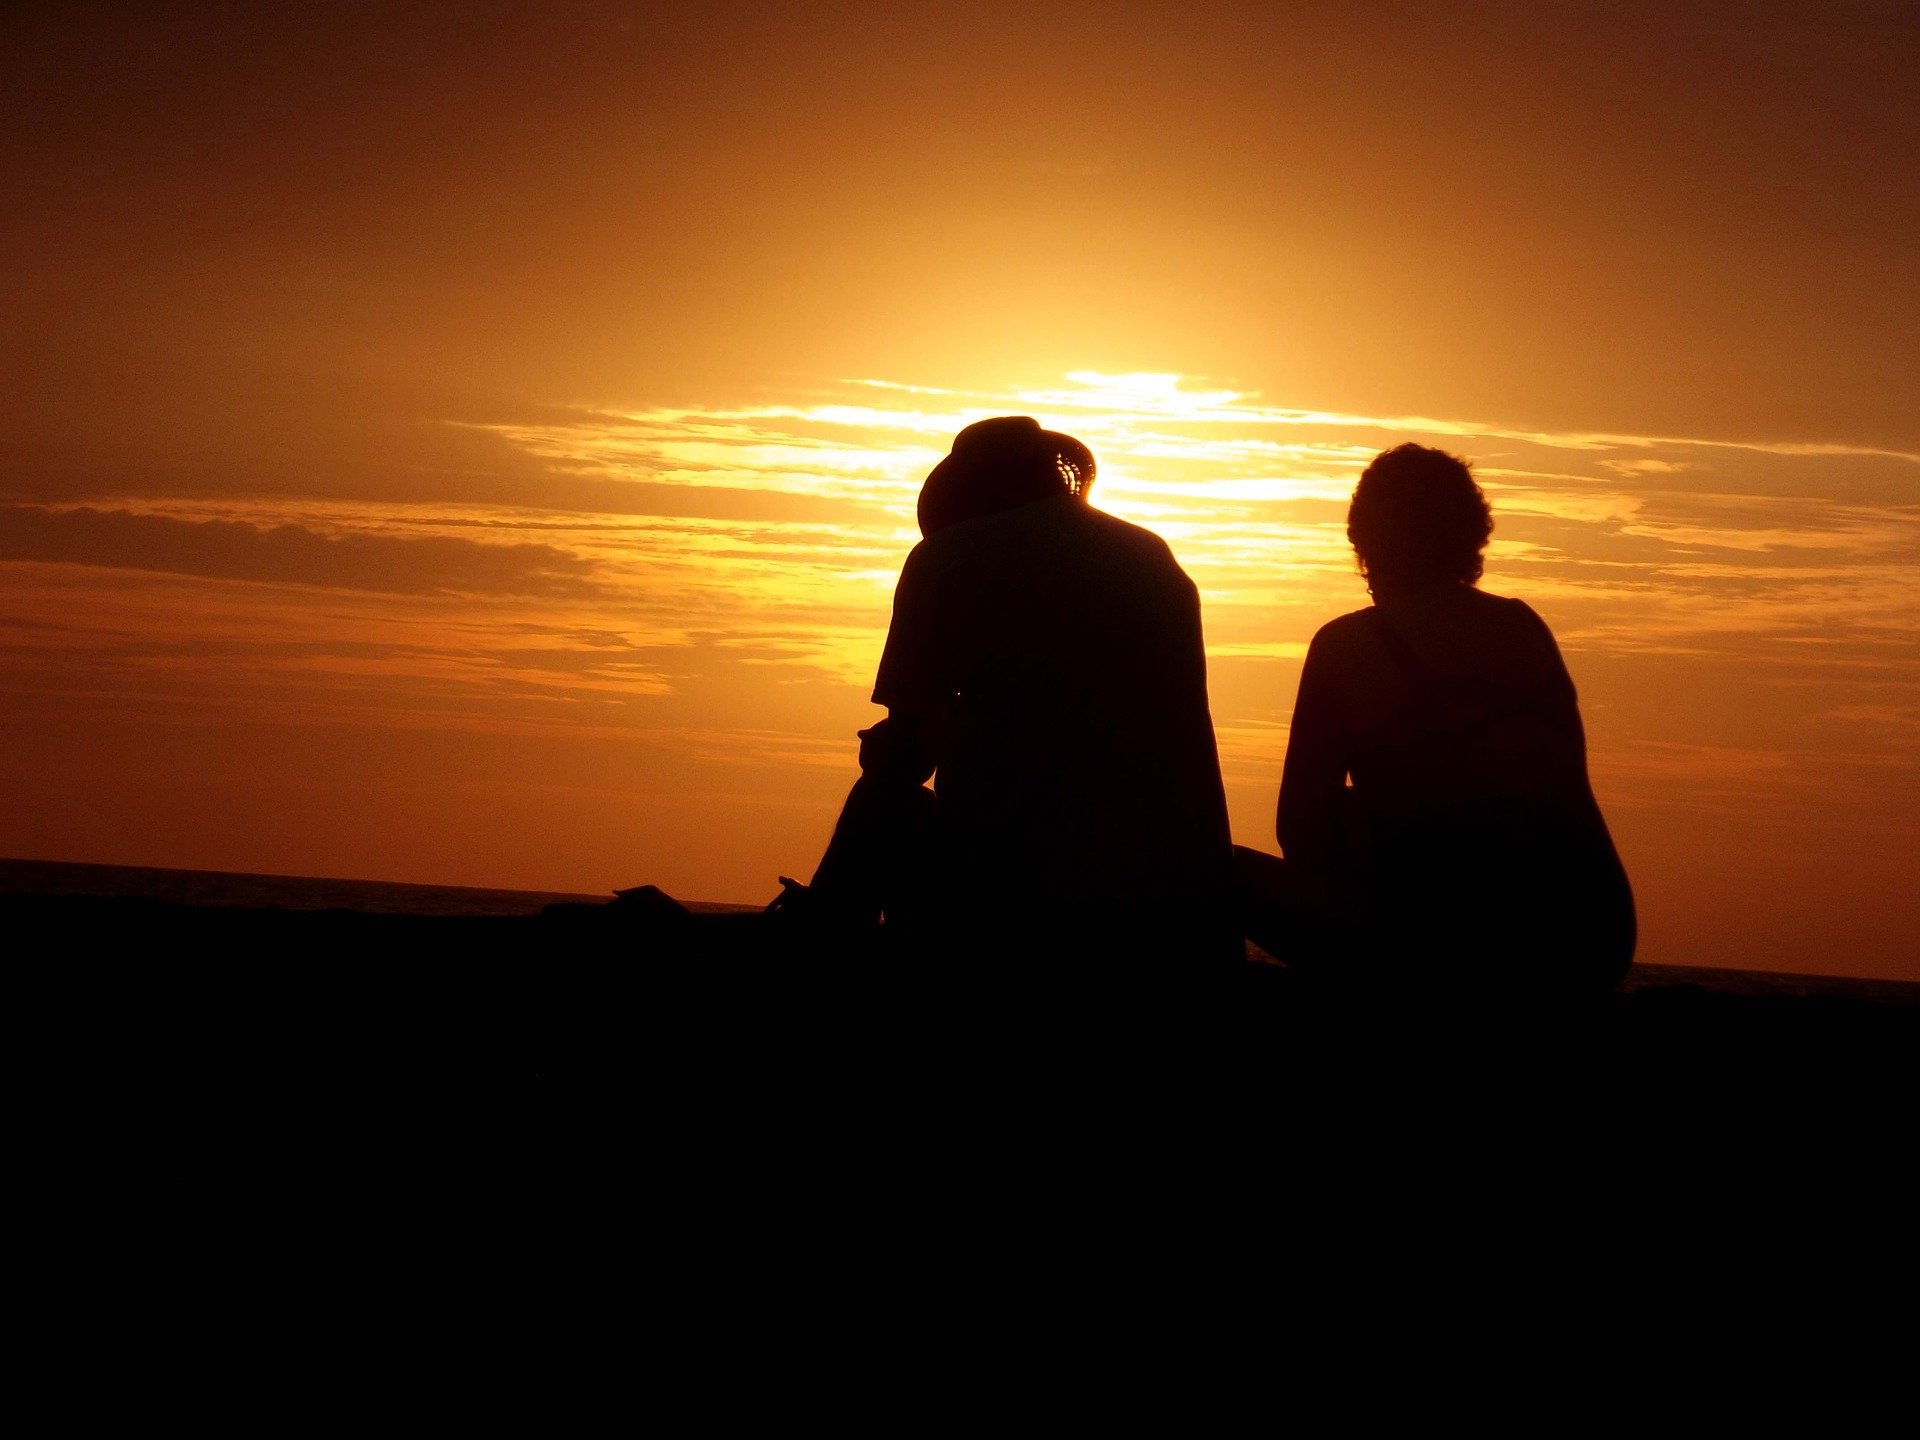 A couple looking into the sunset. | Source: Pixabay.